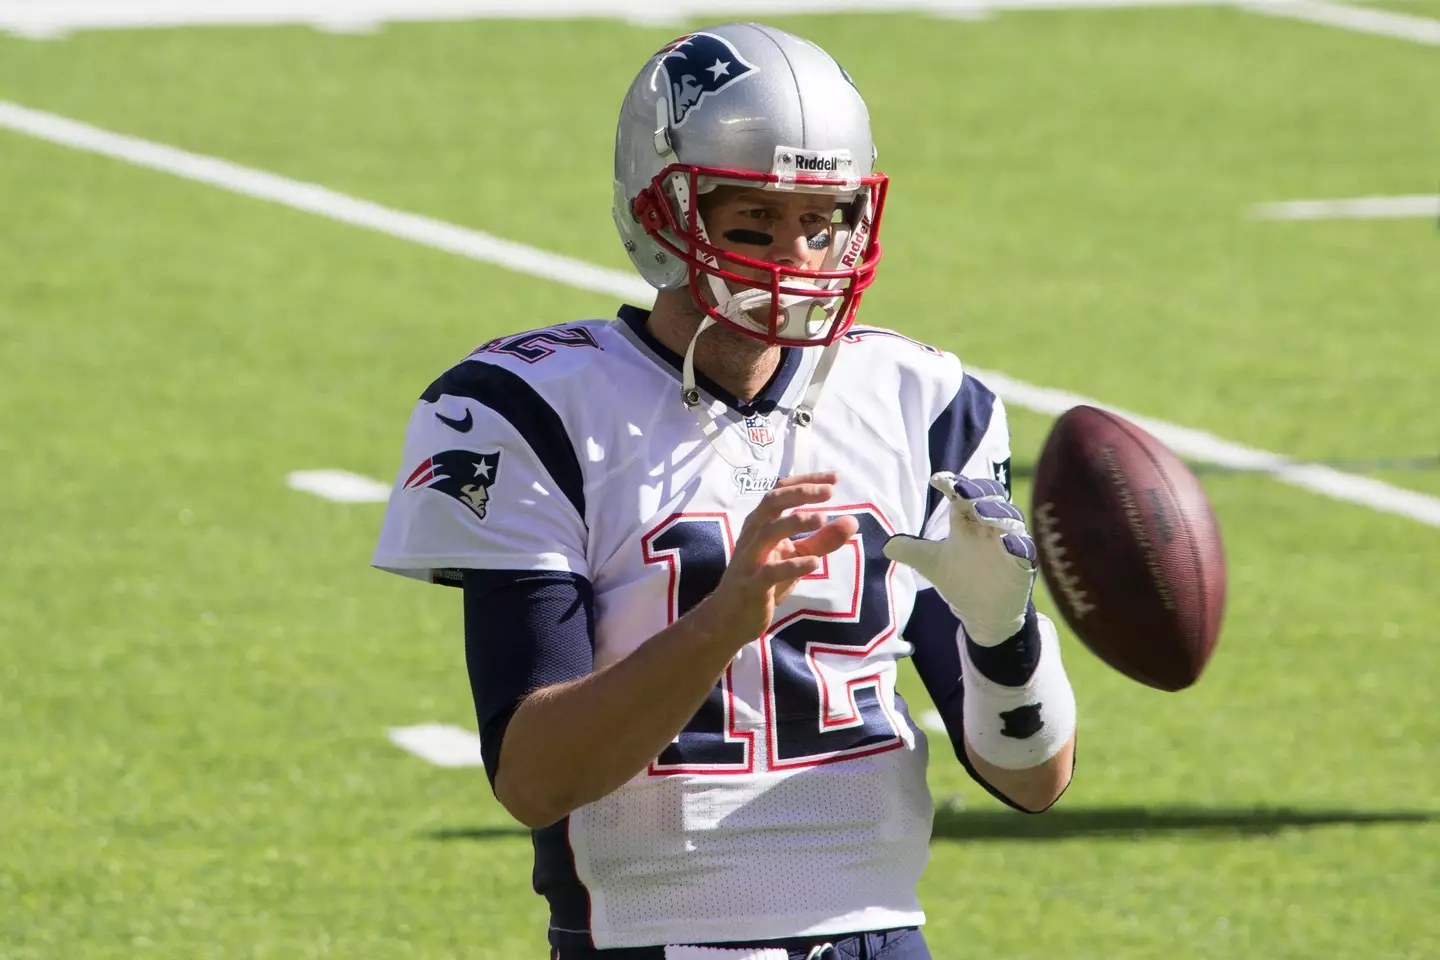 Former New England Patriots superstar Tom Brady has seven Super Bowl rings to his name.